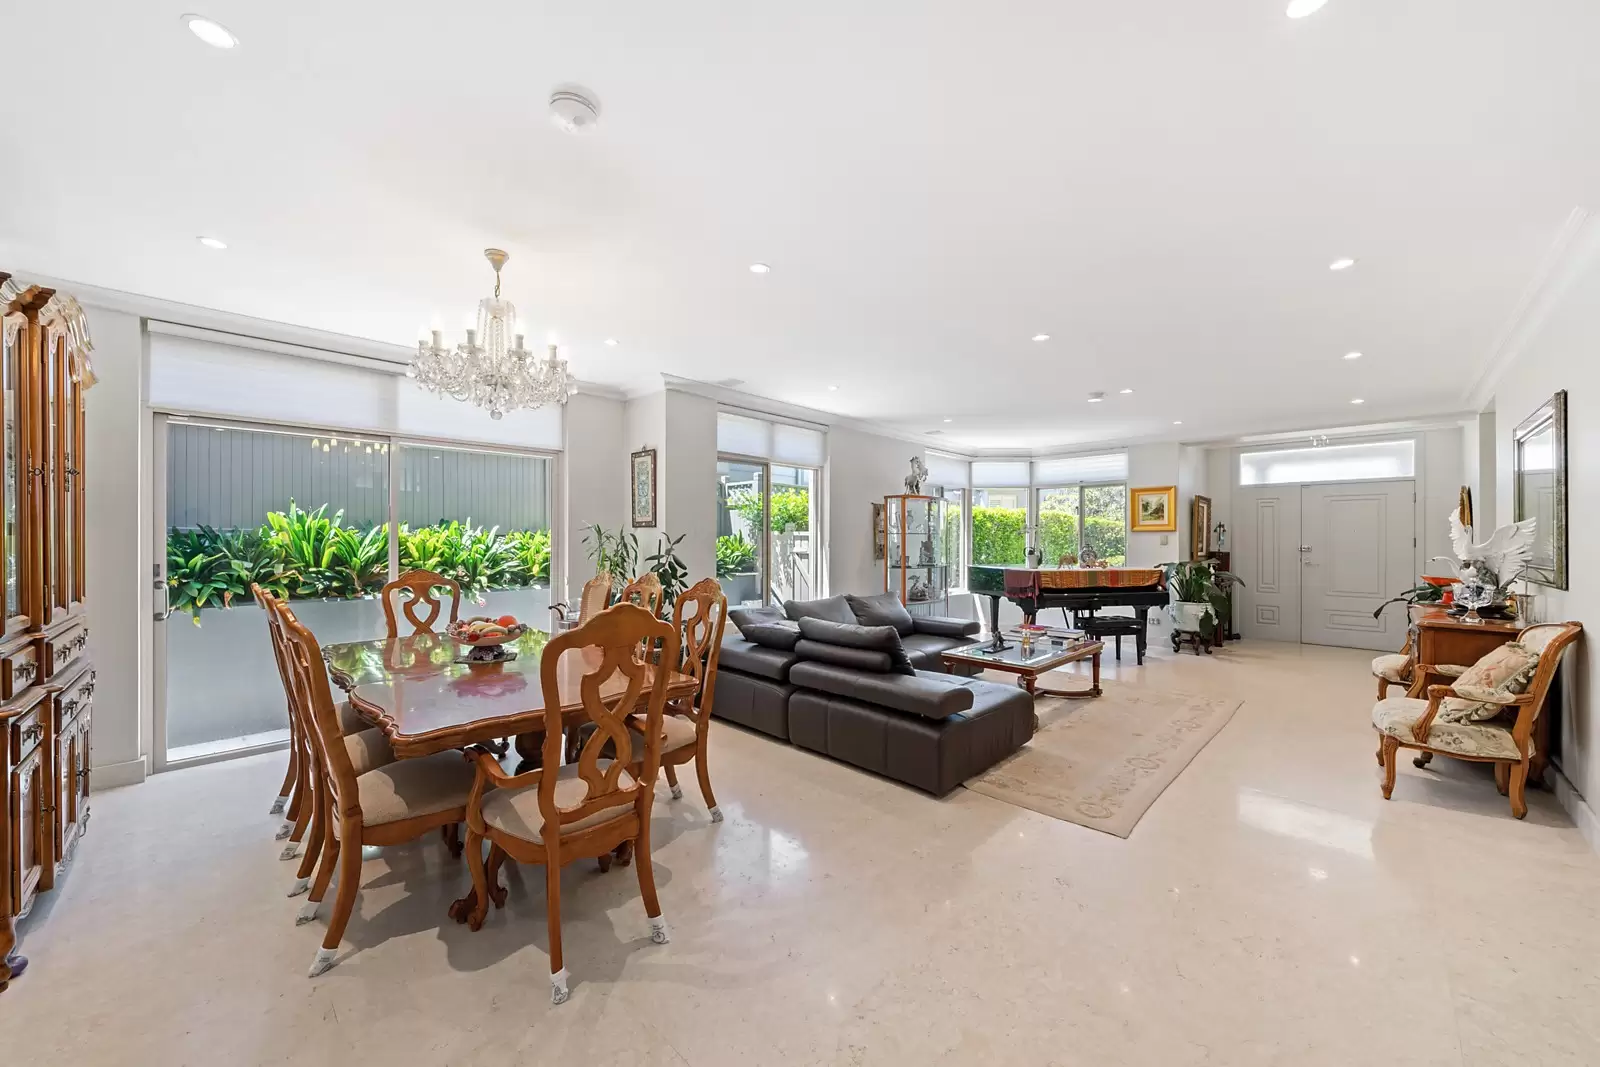 Photo #7: 22/17a Cooper Park Road, Bellevue Hill - Sold by Sydney Sotheby's International Realty